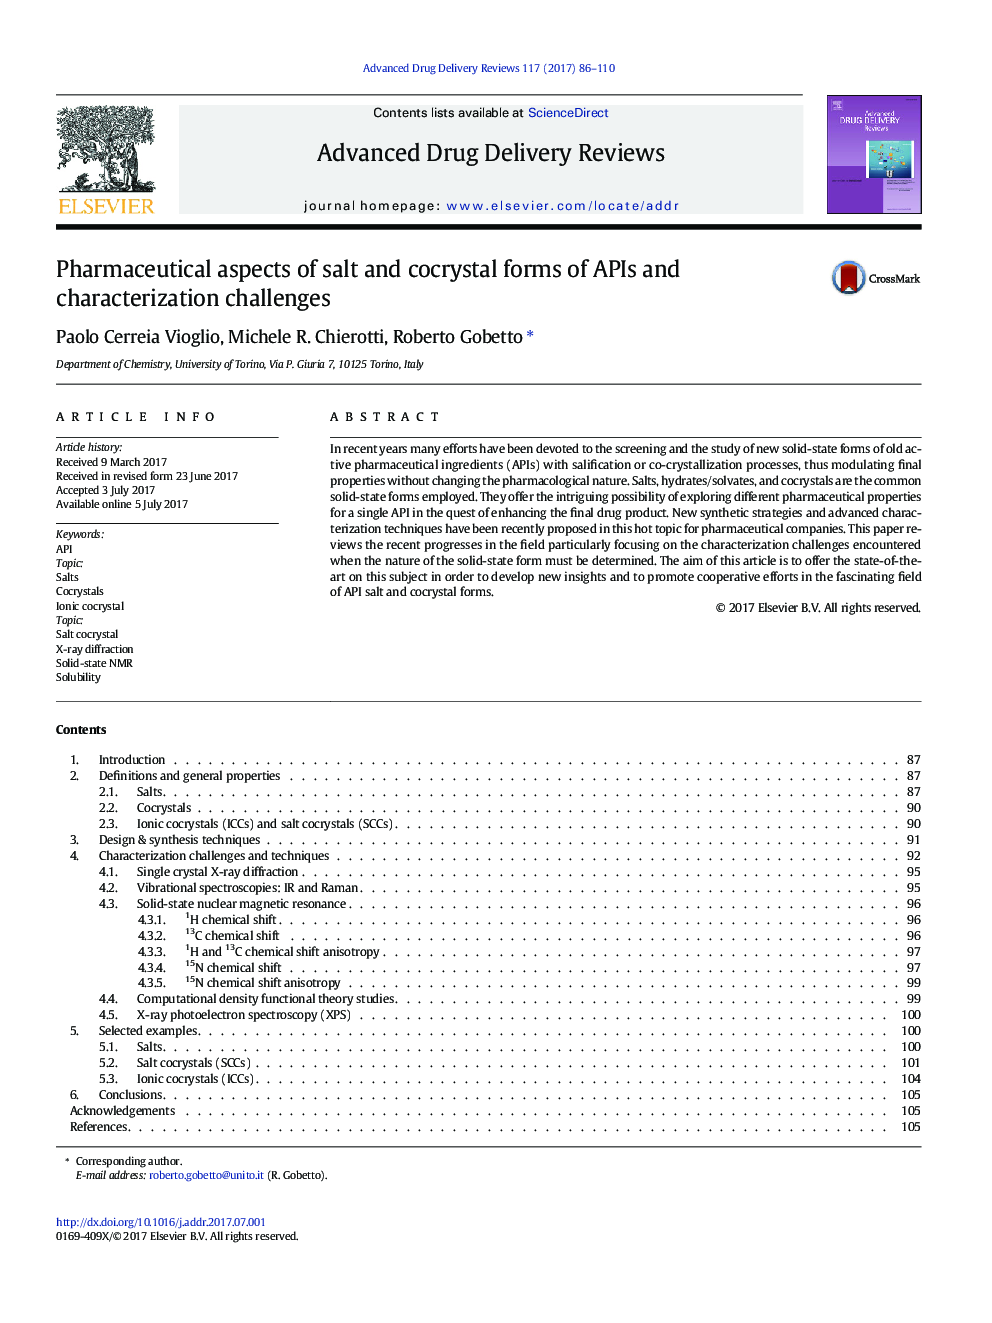 Pharmaceutical aspects of salt and cocrystal forms of APIs and characterization challenges